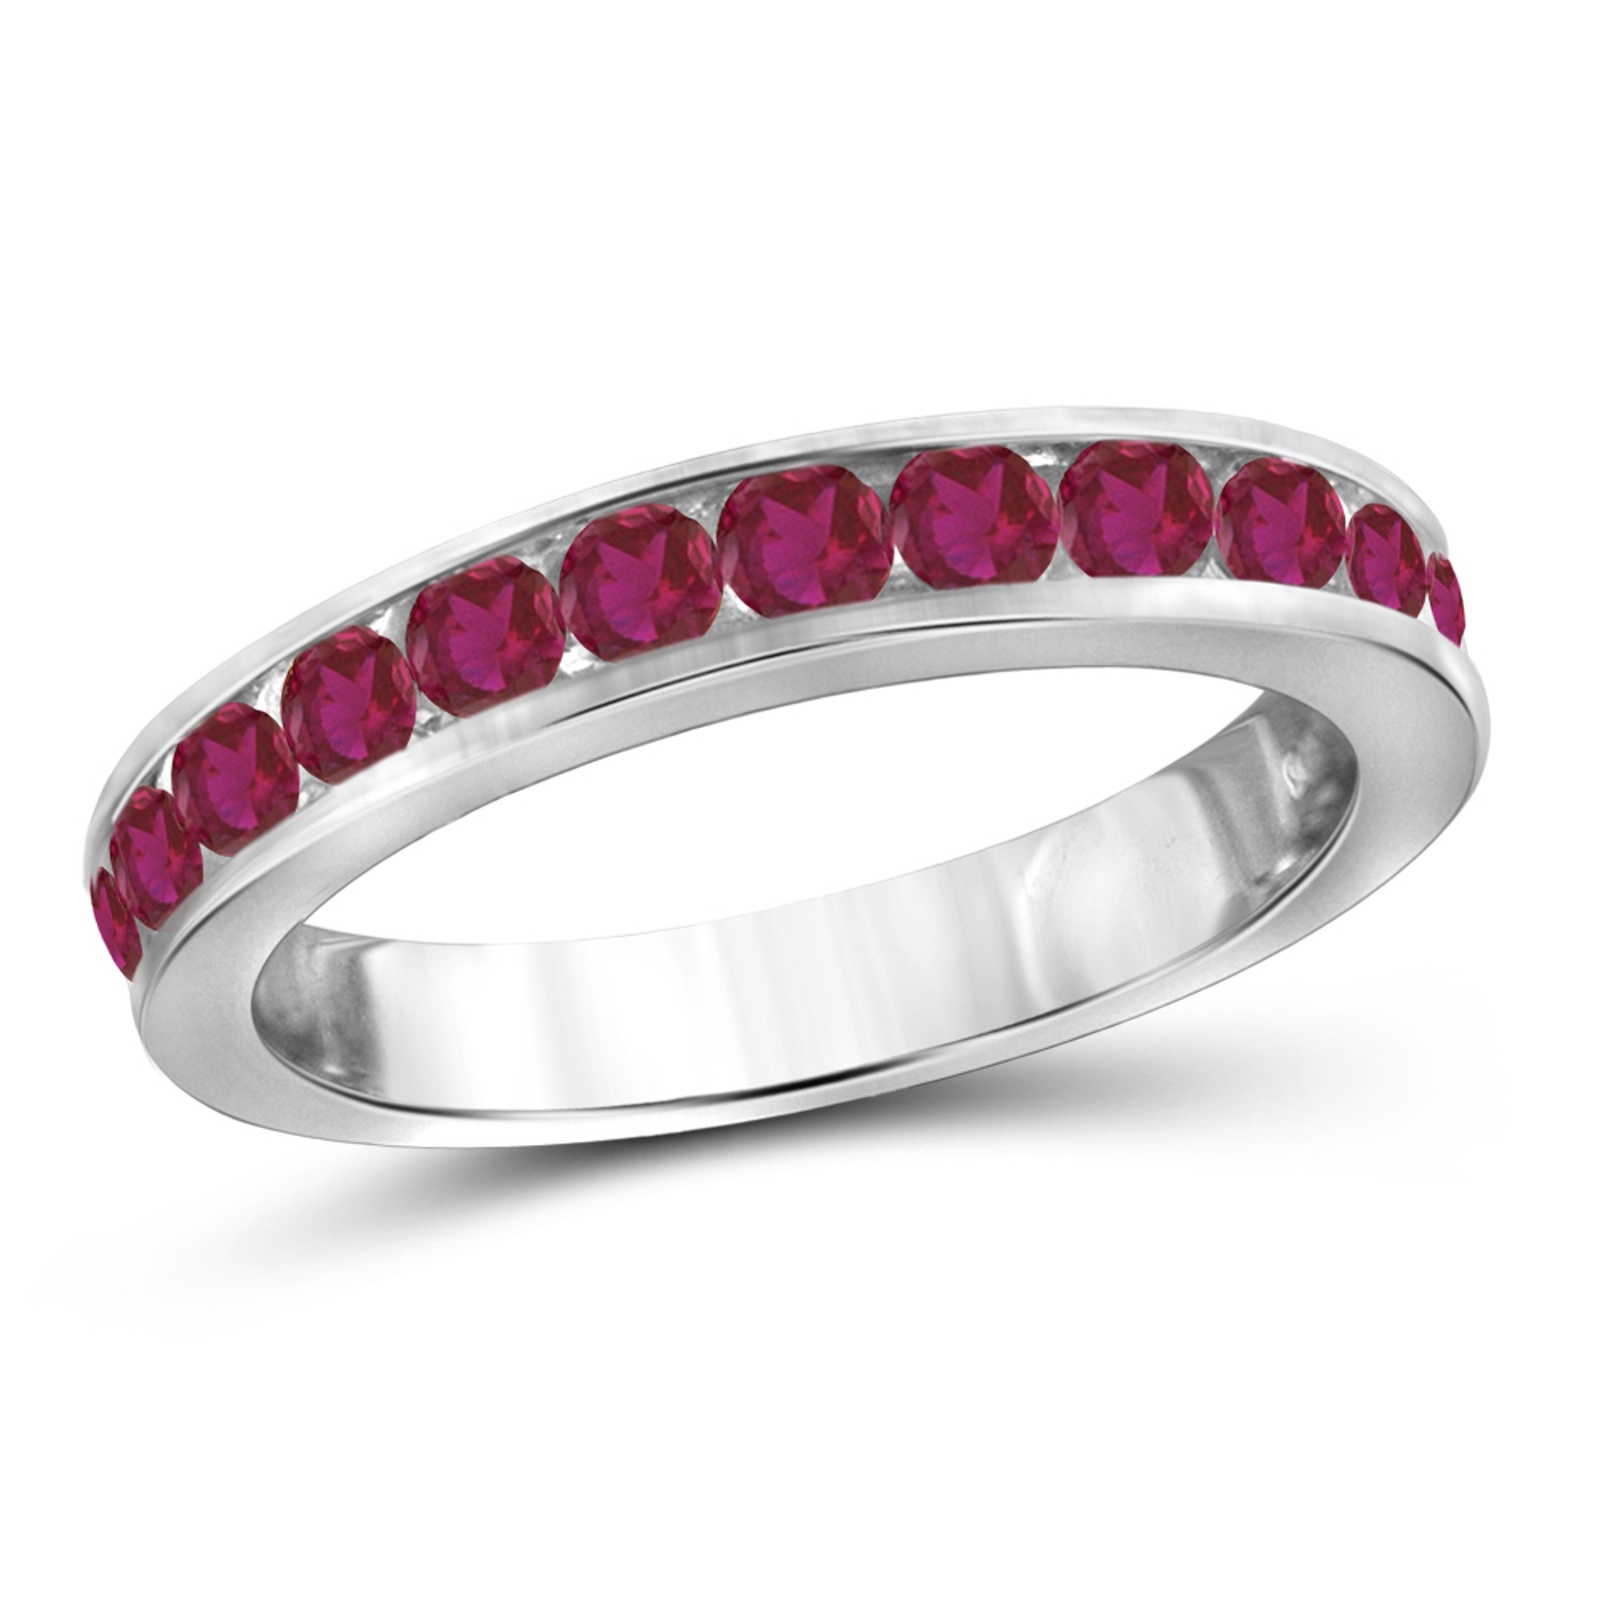 0.60ctw. Created Ruby Stackable Ring